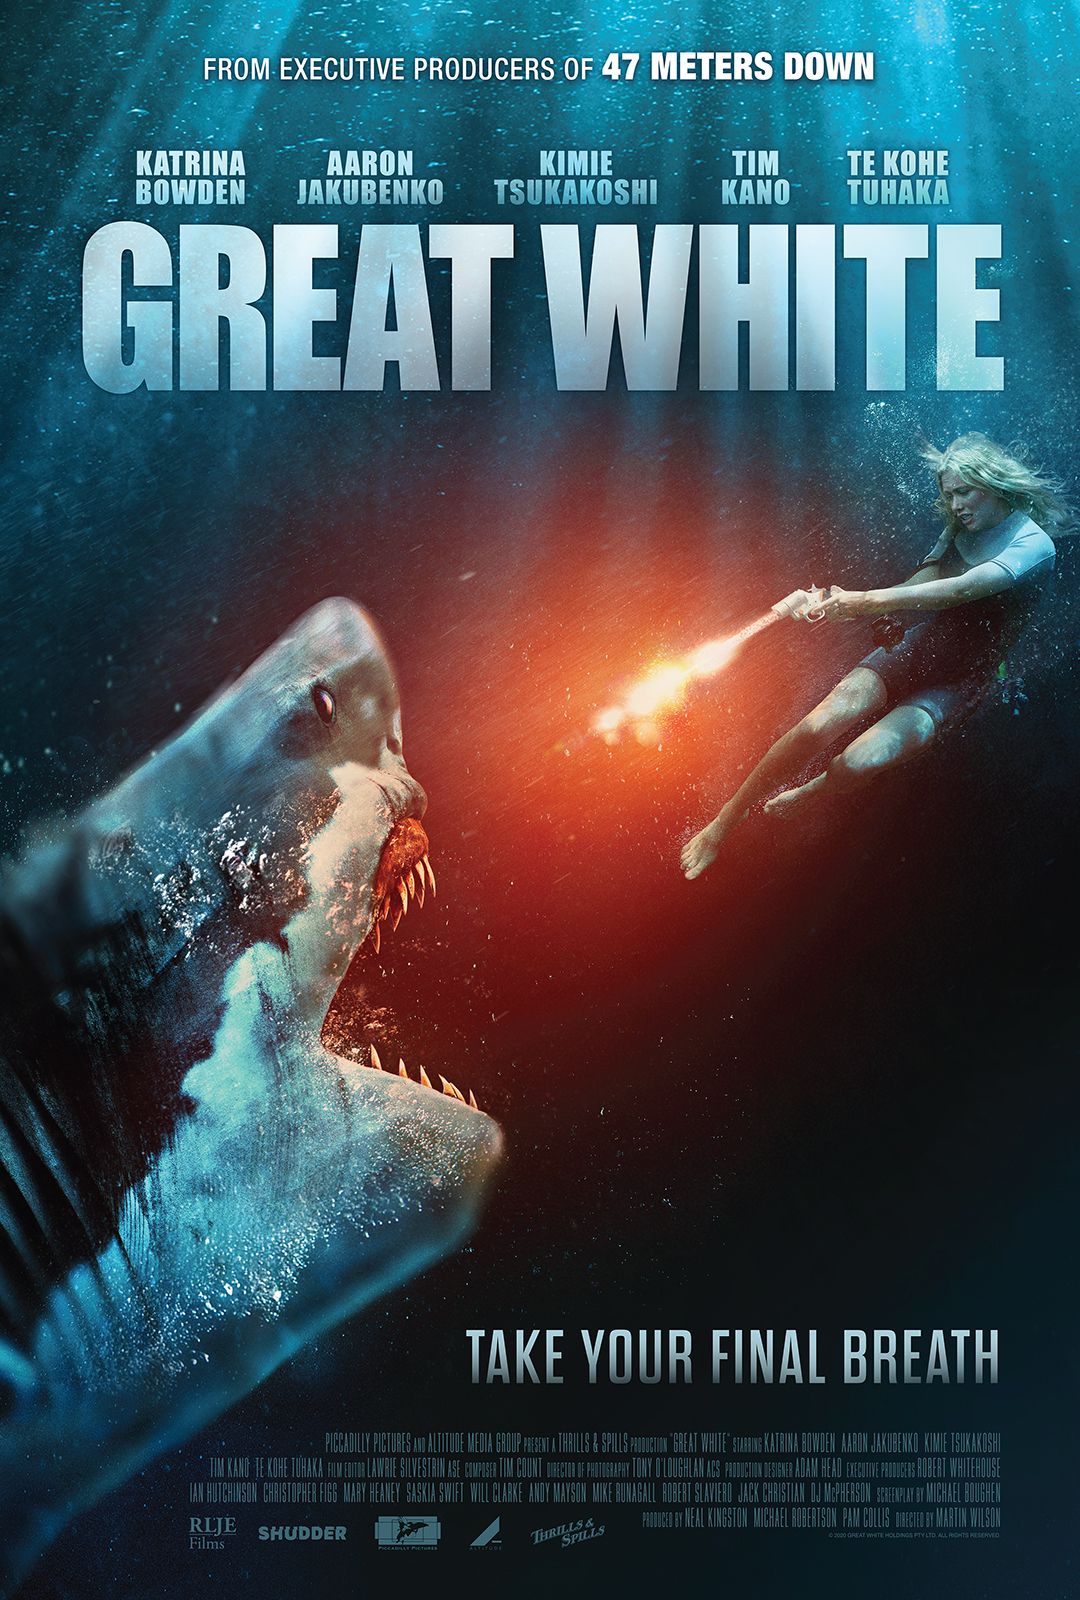 Even the sharks look bored in generic Great White